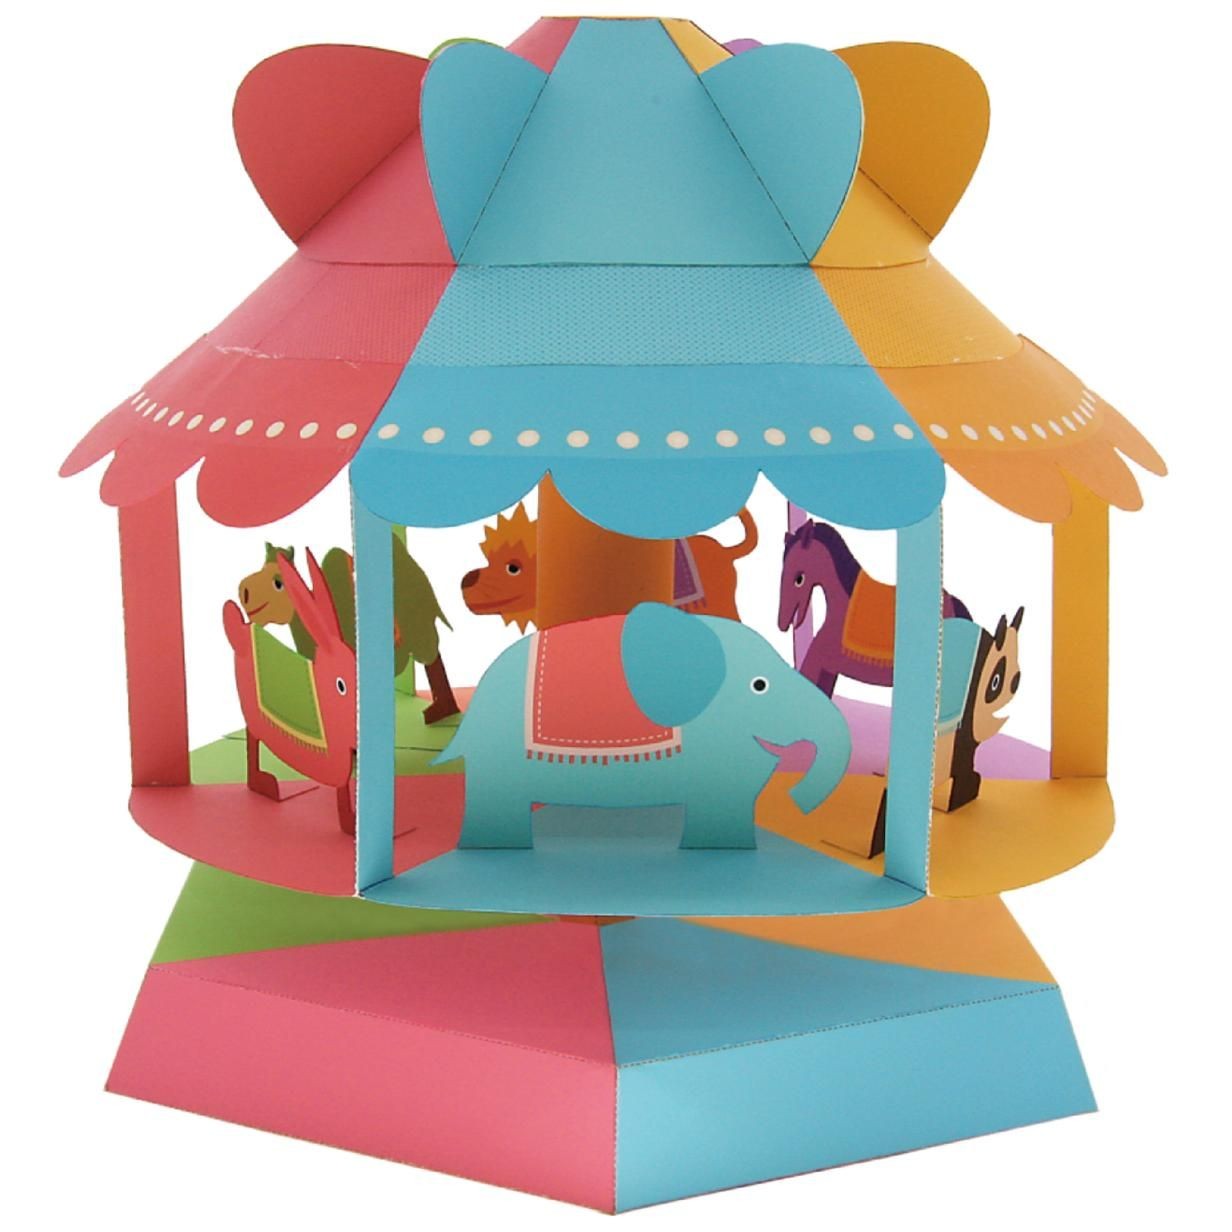 Creative Park Papercraft Wind Powered Merry Go Round toys Paper Craft Educational Rabbit